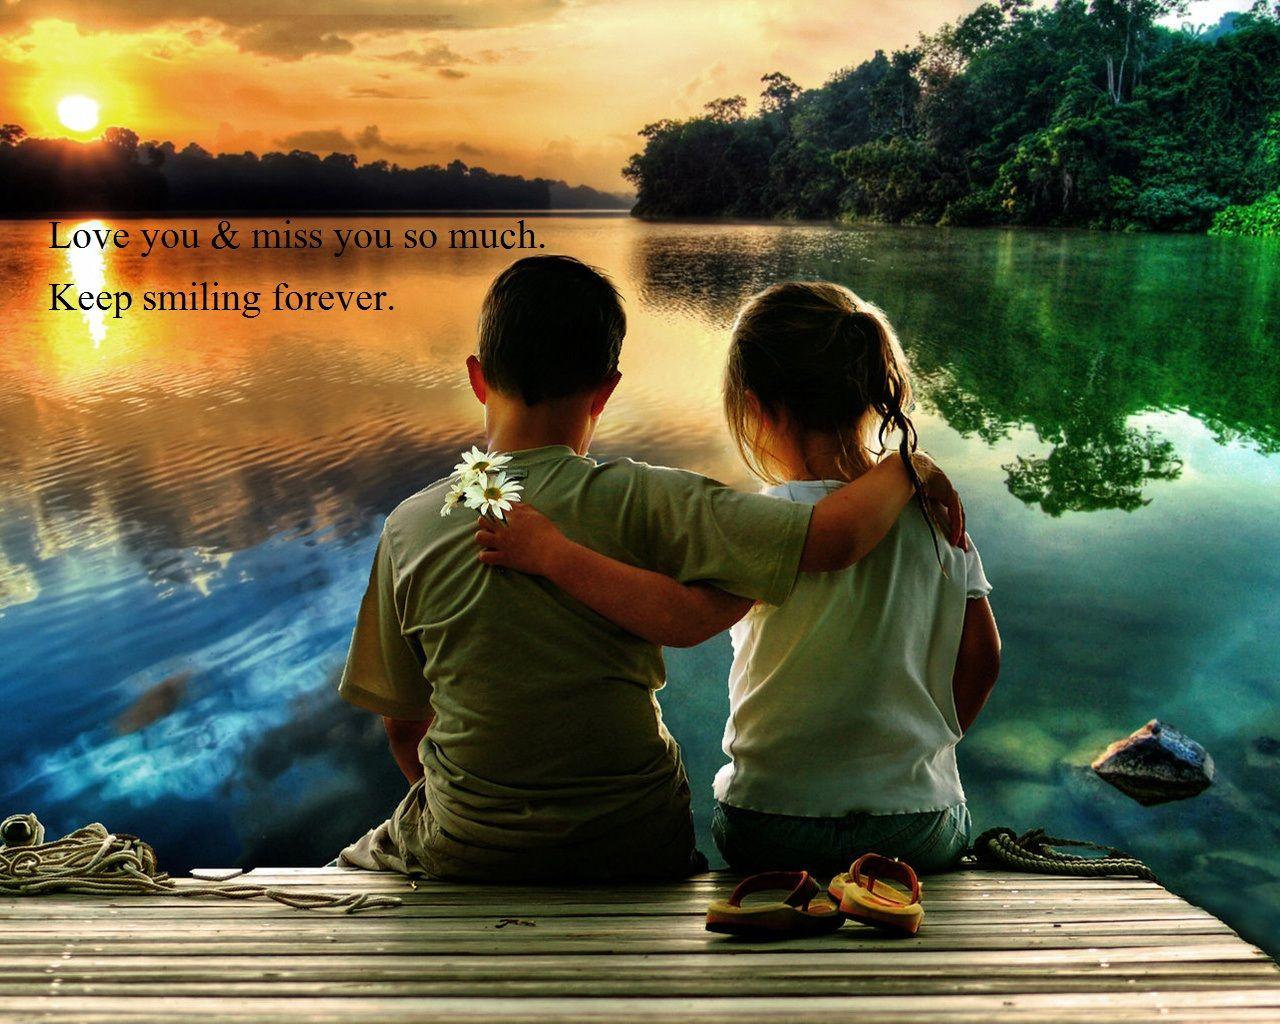 Cute Friendship Quotes With Image. Friendship wallpaper